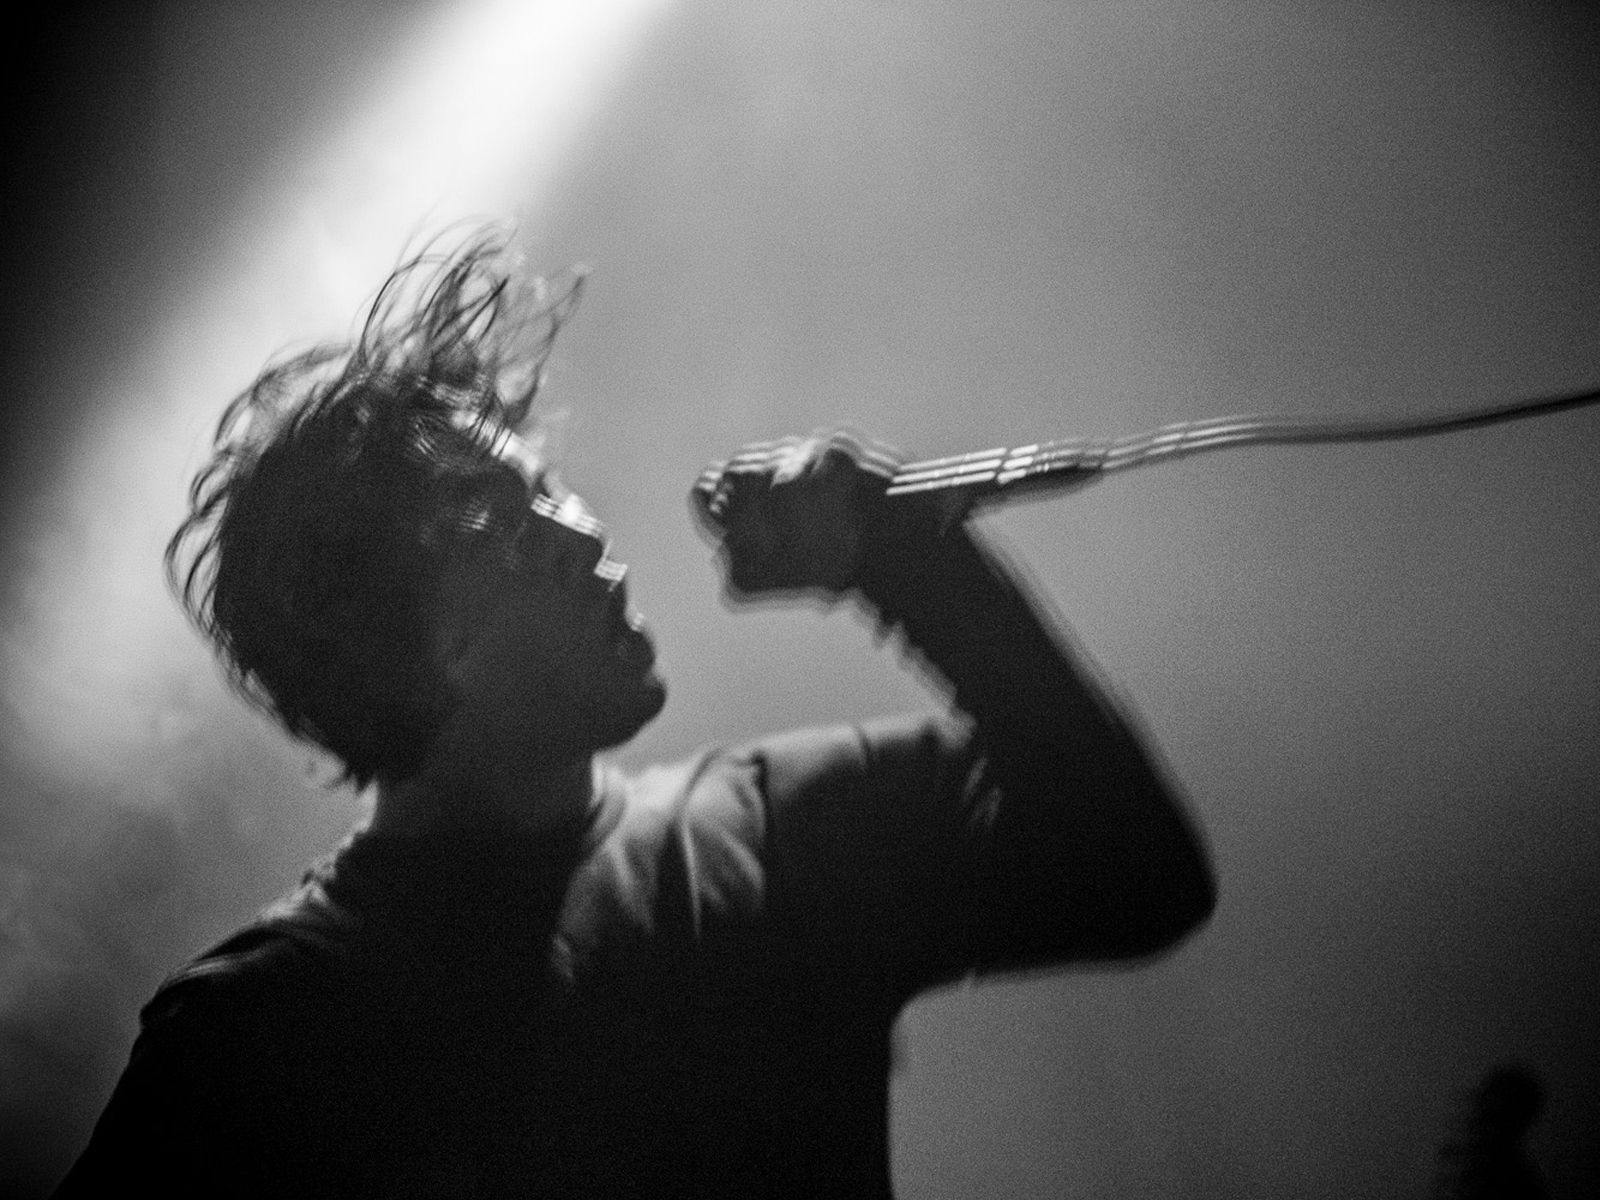 Buzz Kull performing with a microphone, their hair floating above them as they move their head.